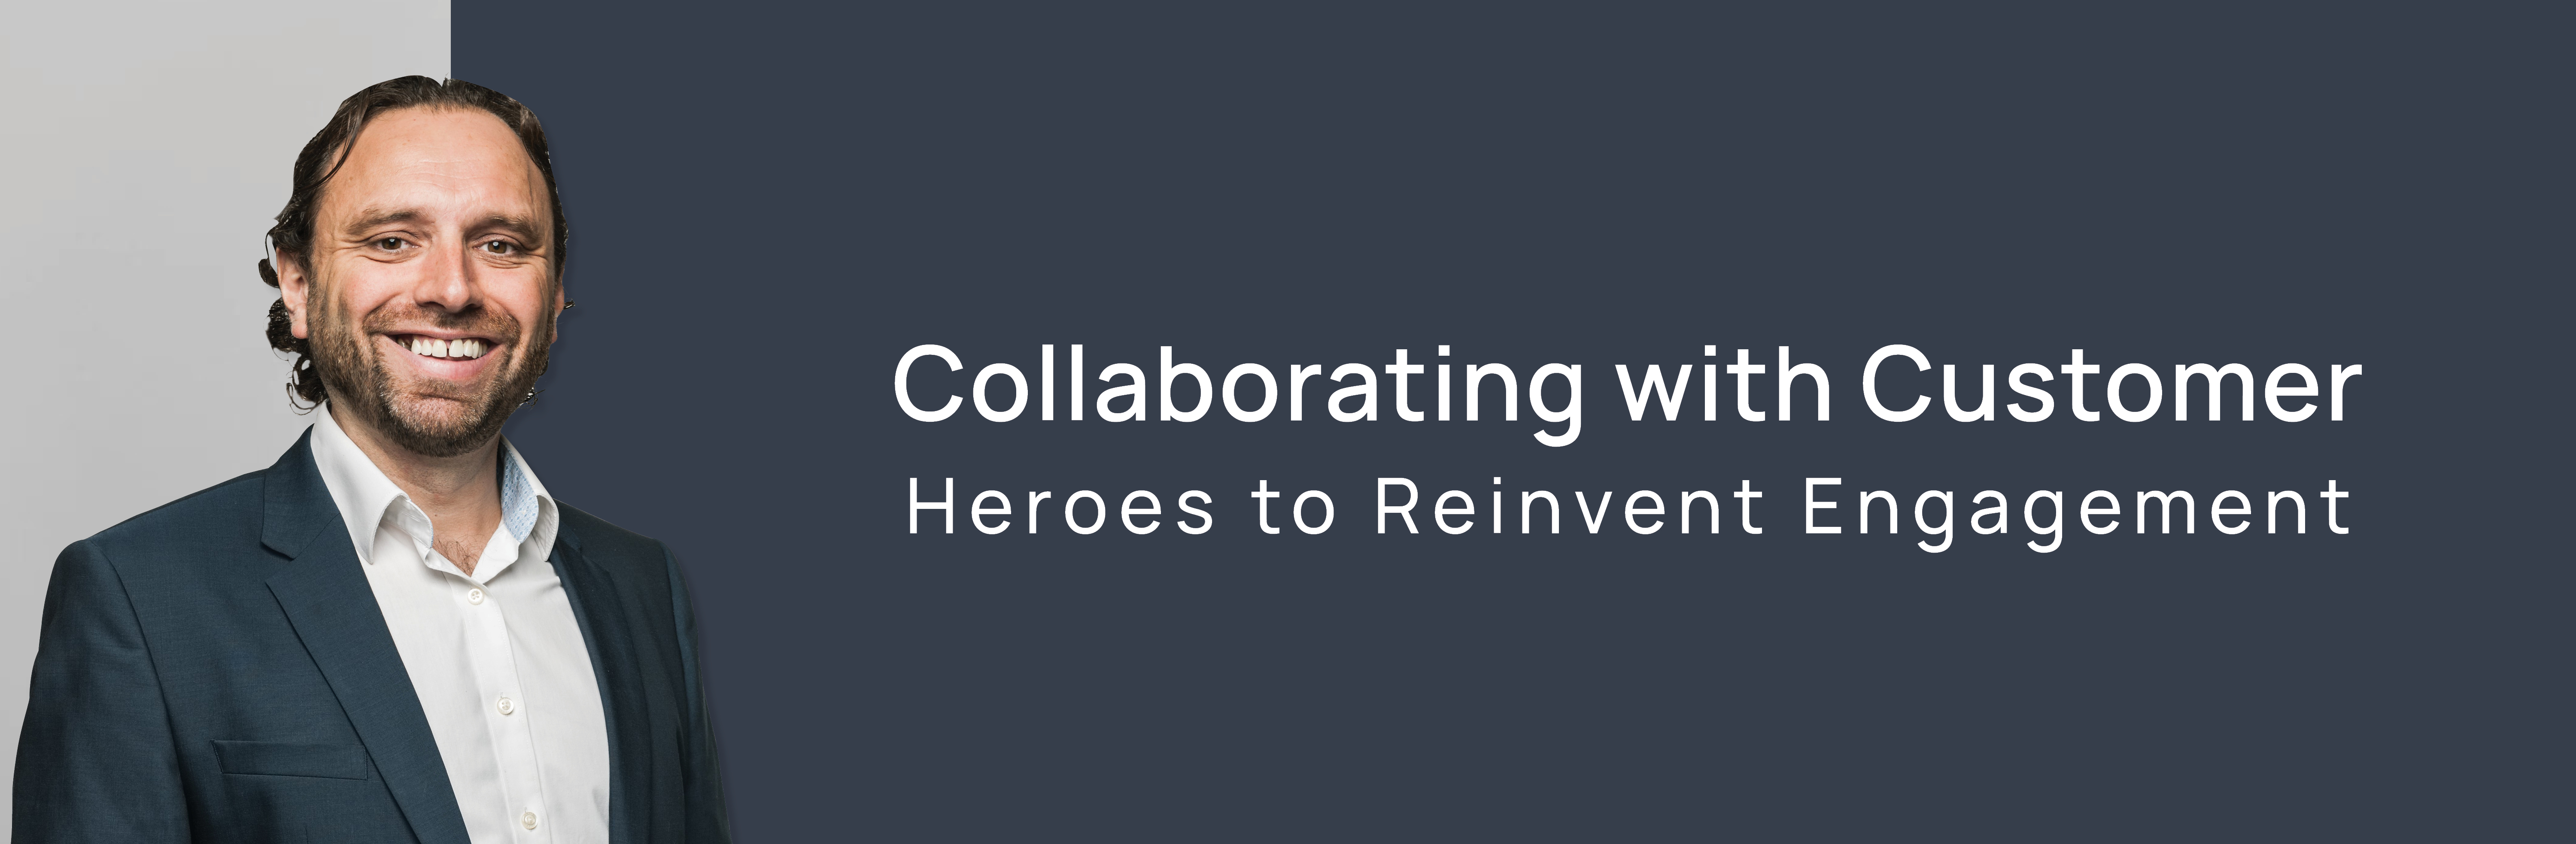 Collaborating with Customer Heroes to Reinvent Engagement